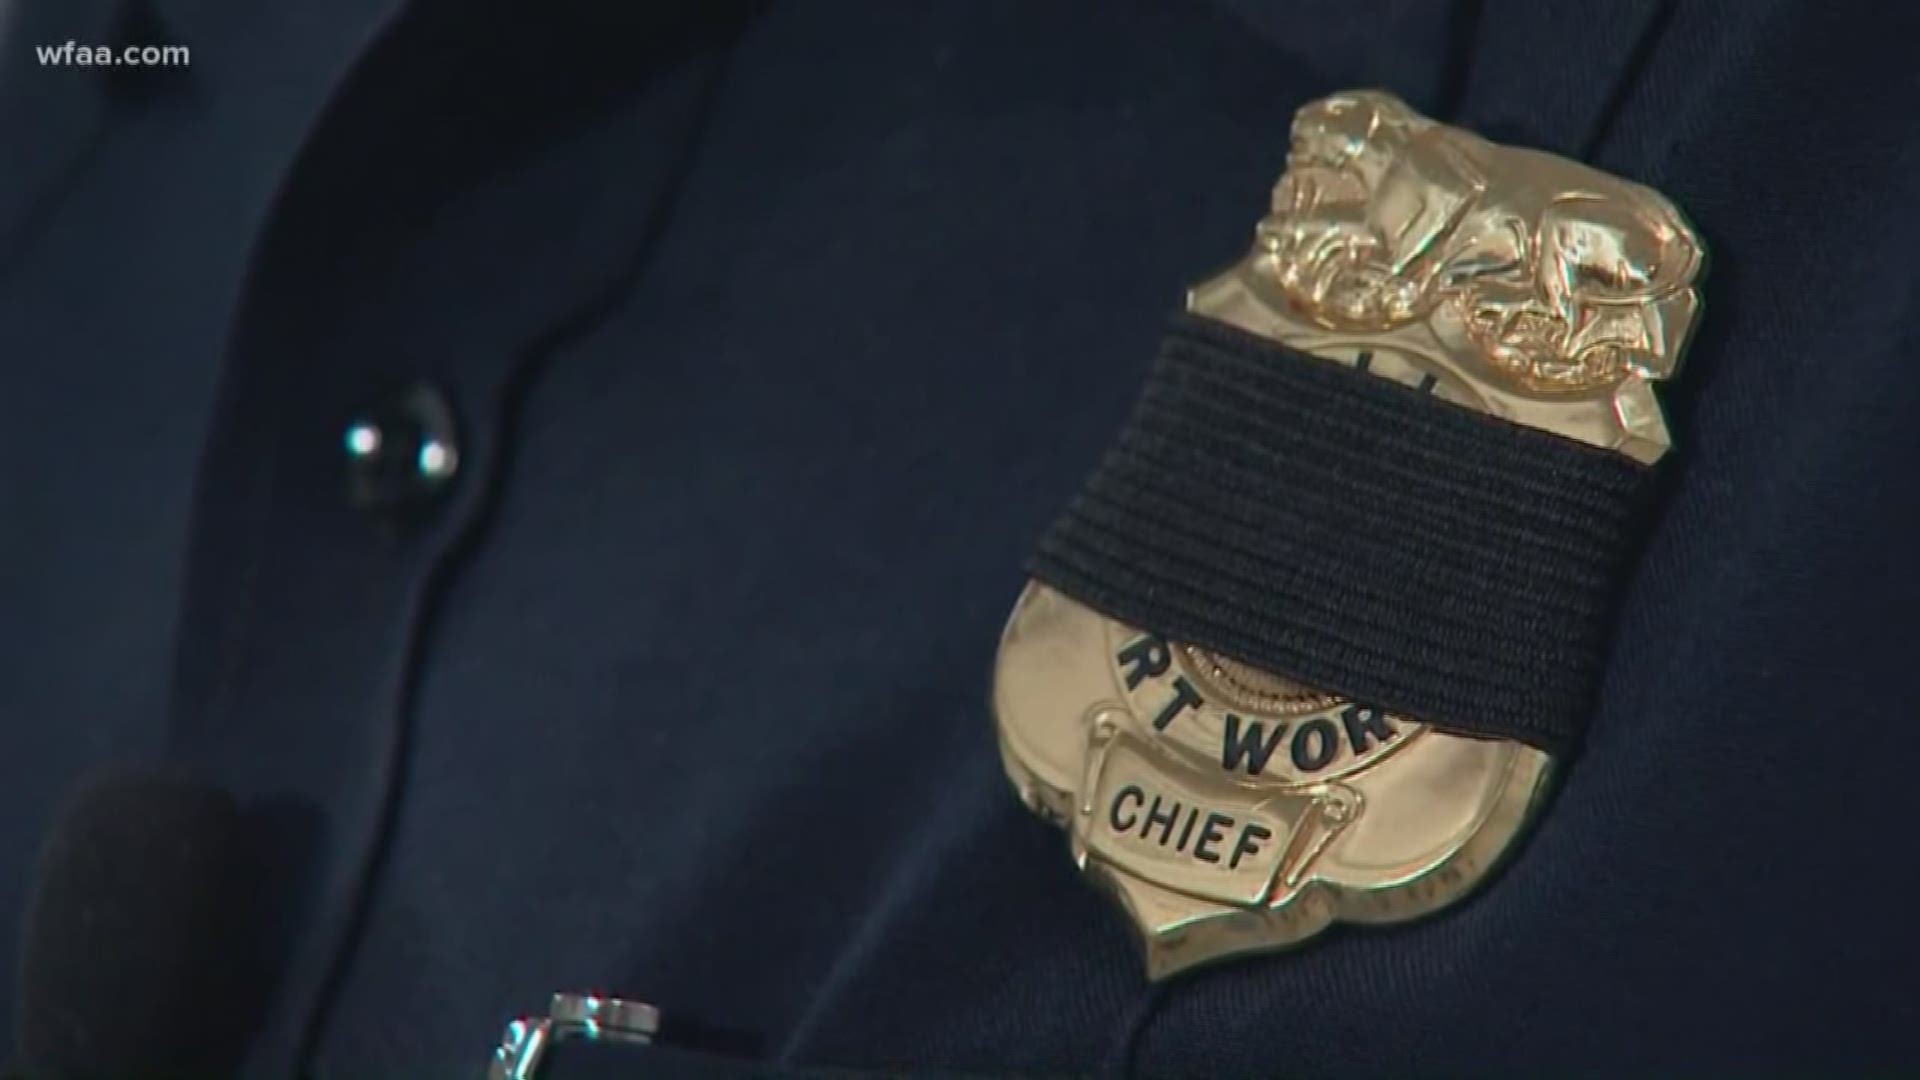 The Fort Worth mayor says the City is looking into an incident involving the police chief at a national 2019 Top Cops Award ceremony.